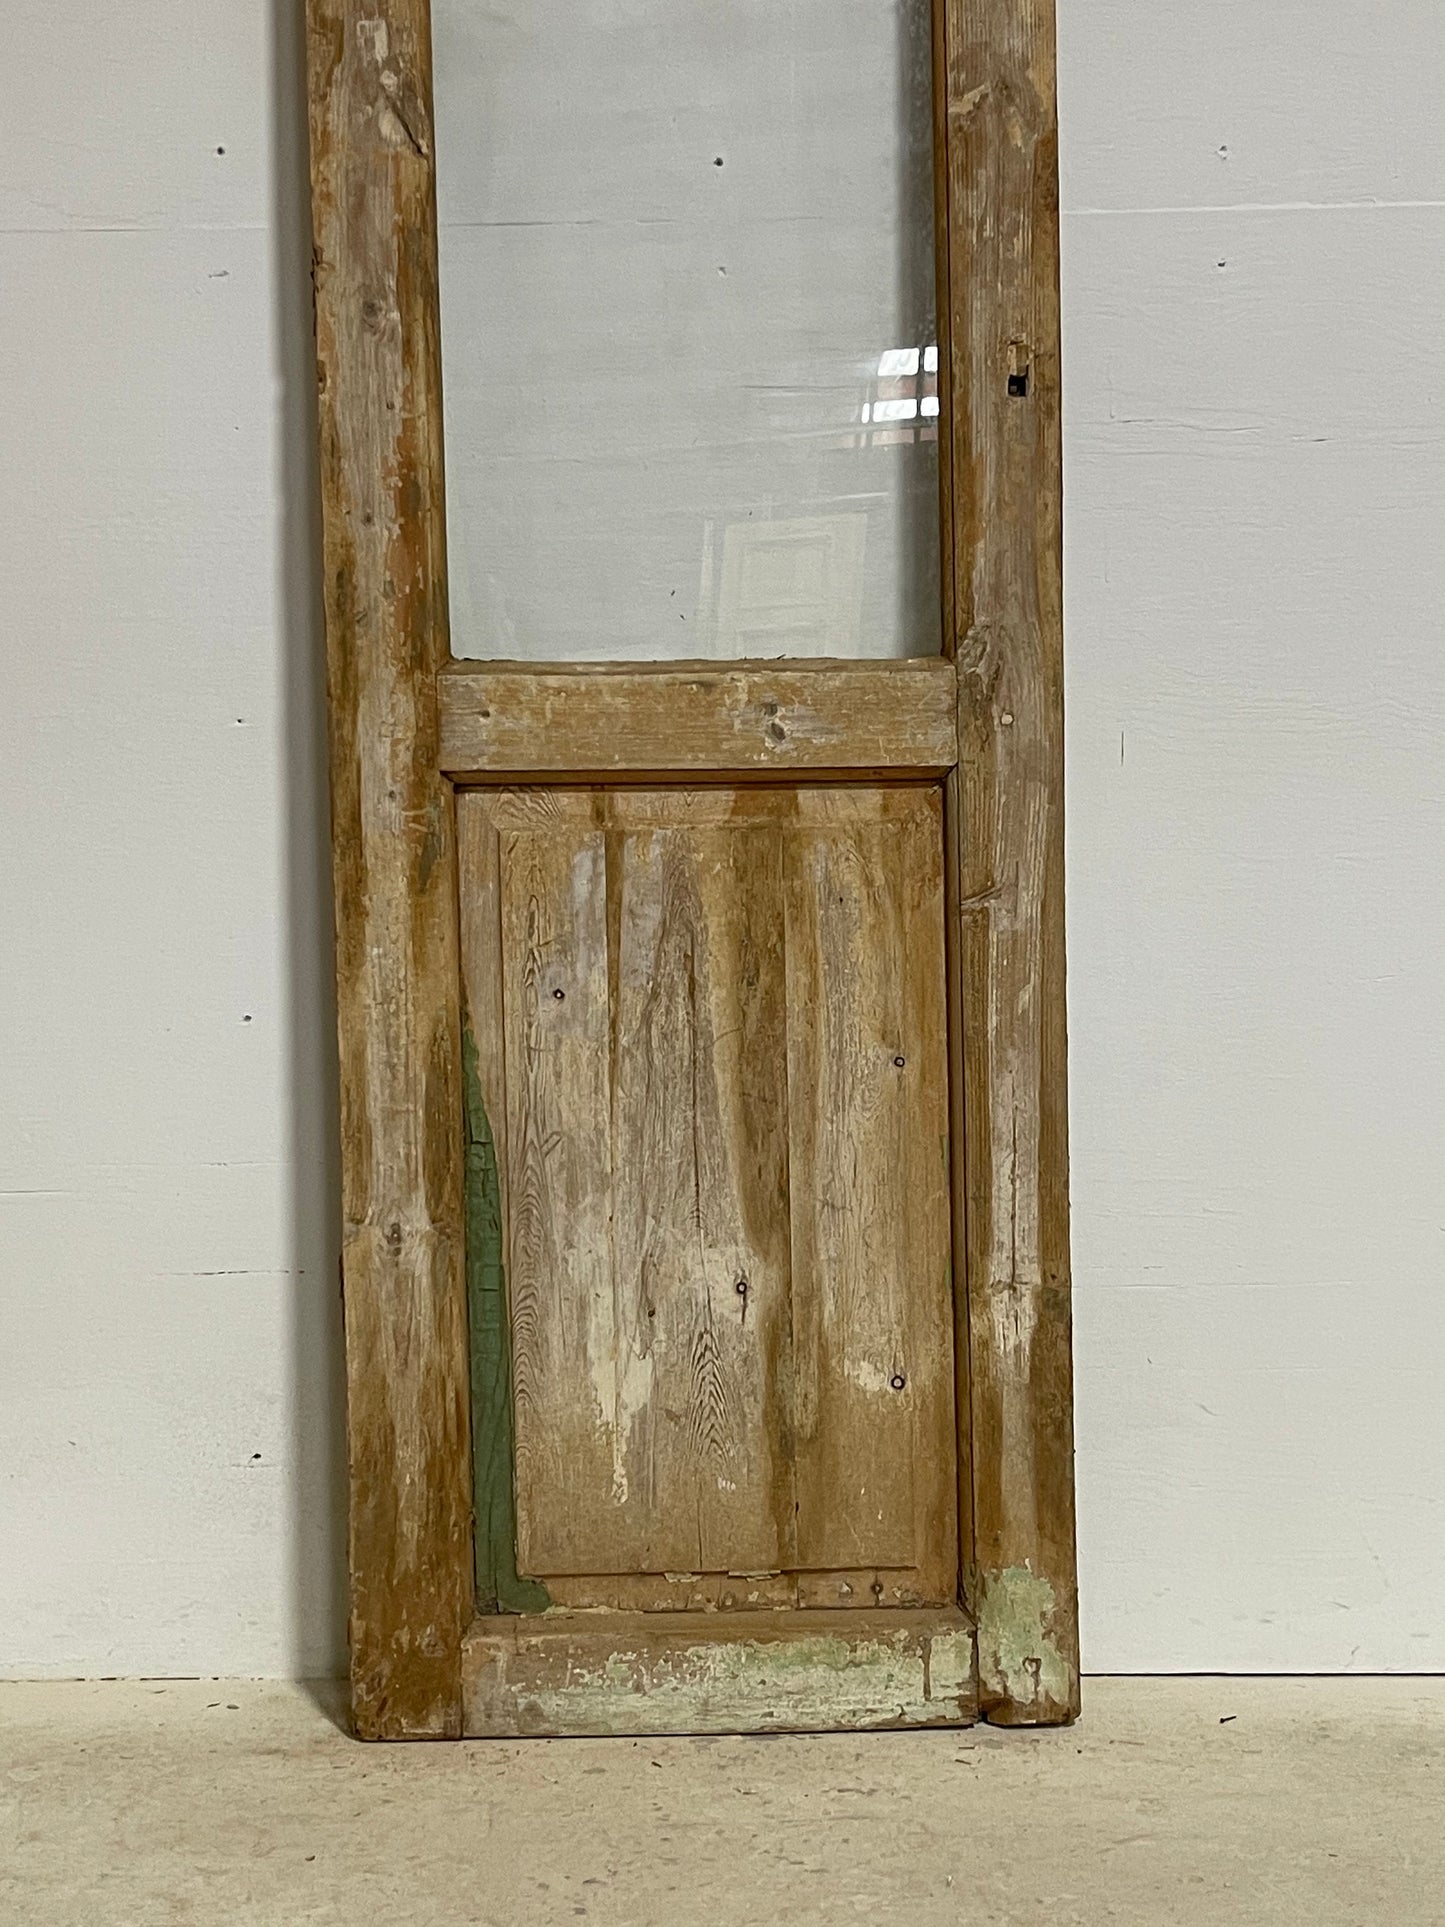 Antique French panel door with glass (89.25x23) G1405s